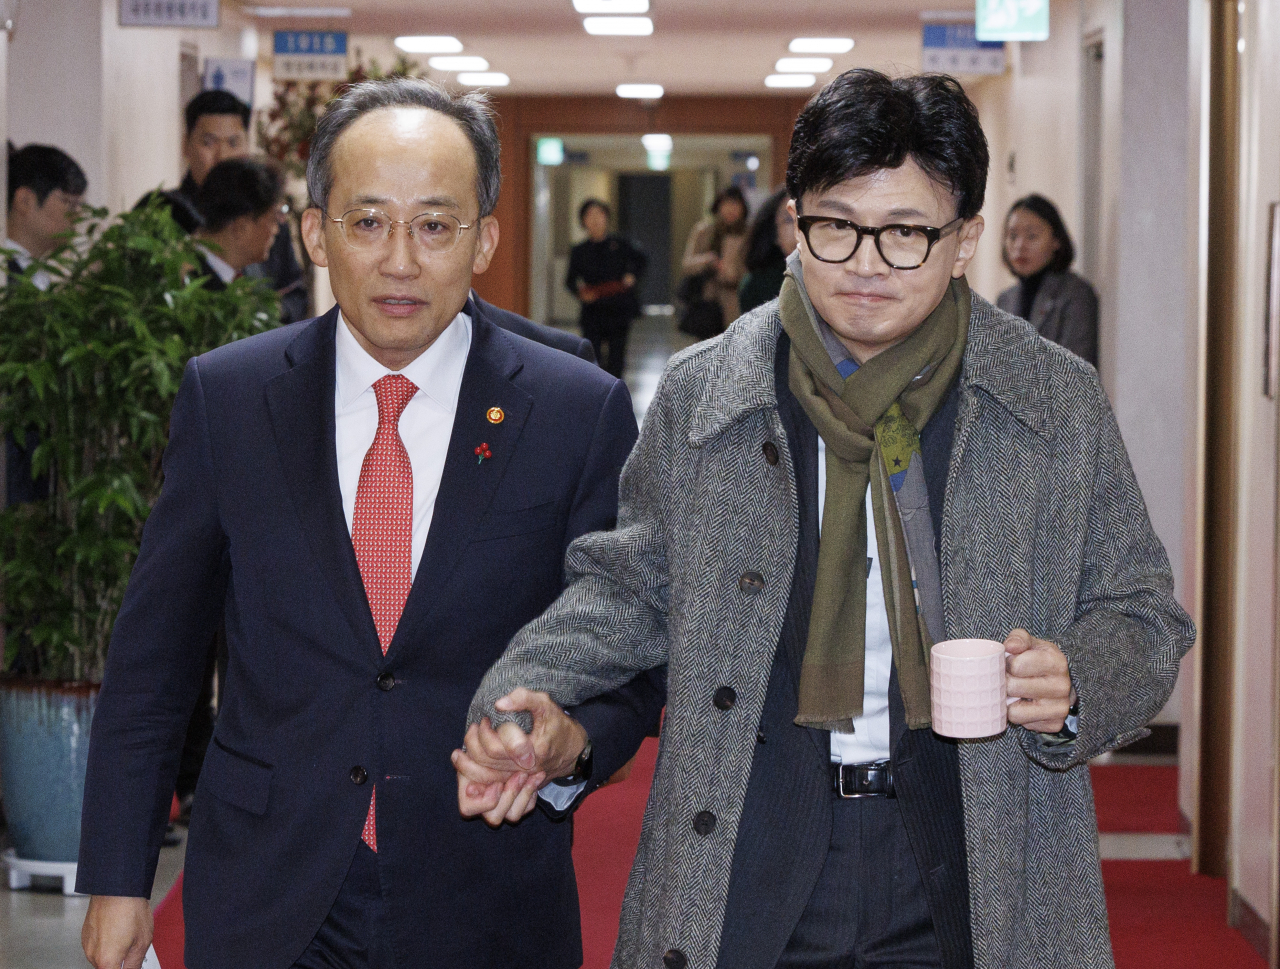 Deputy Prime Minister and Finance Minister Choo Kyung-ho (left) holds hands with Justice Minister Han Dong-hoon as they enter a Cabinet meeting at the Government Complex Seoul on Friday. (Yonhap)